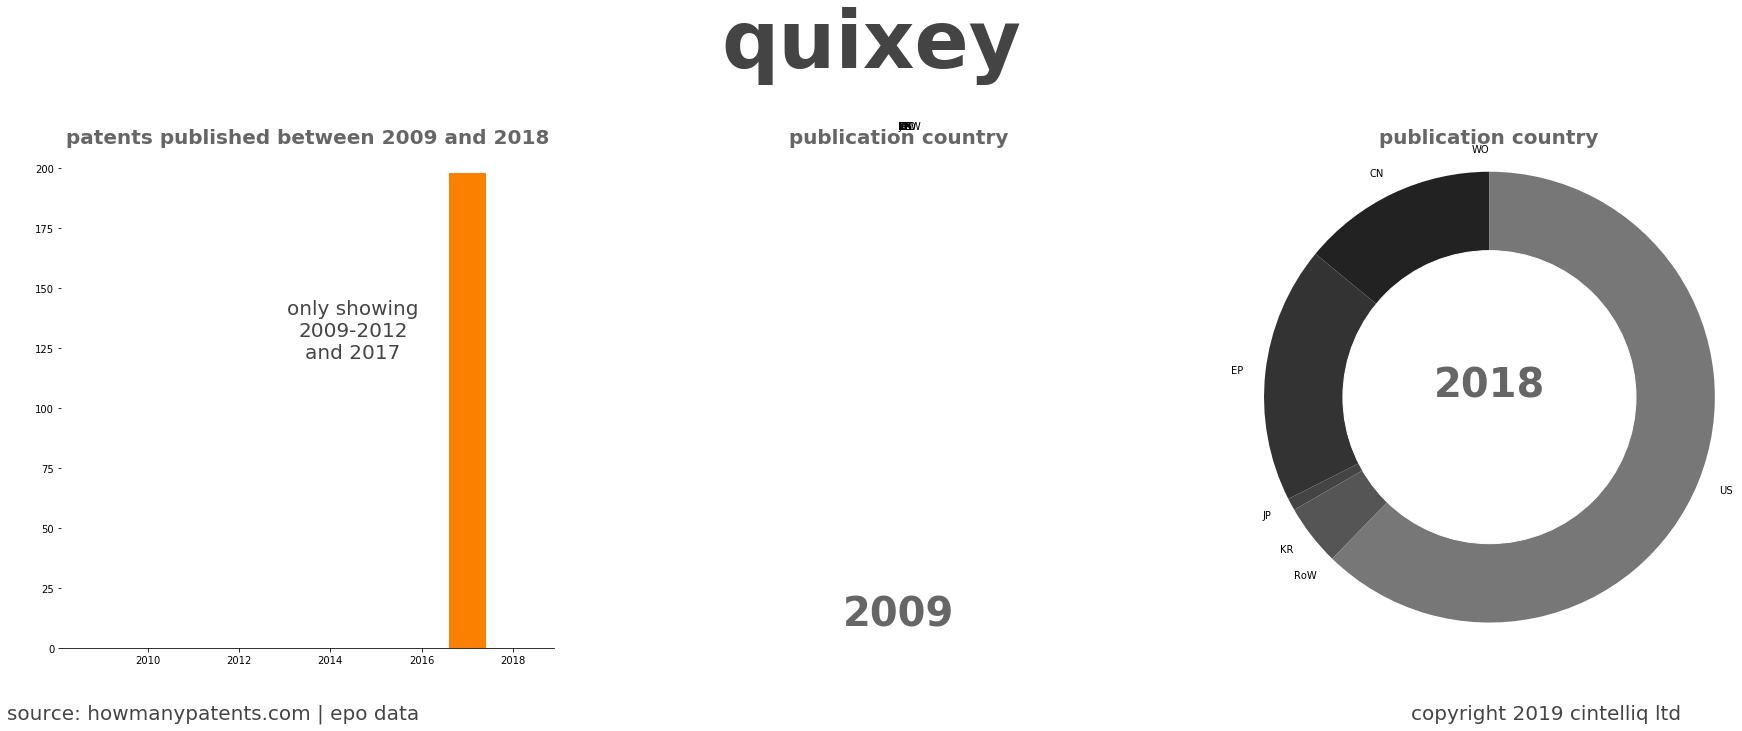 summary of patents for Quixey